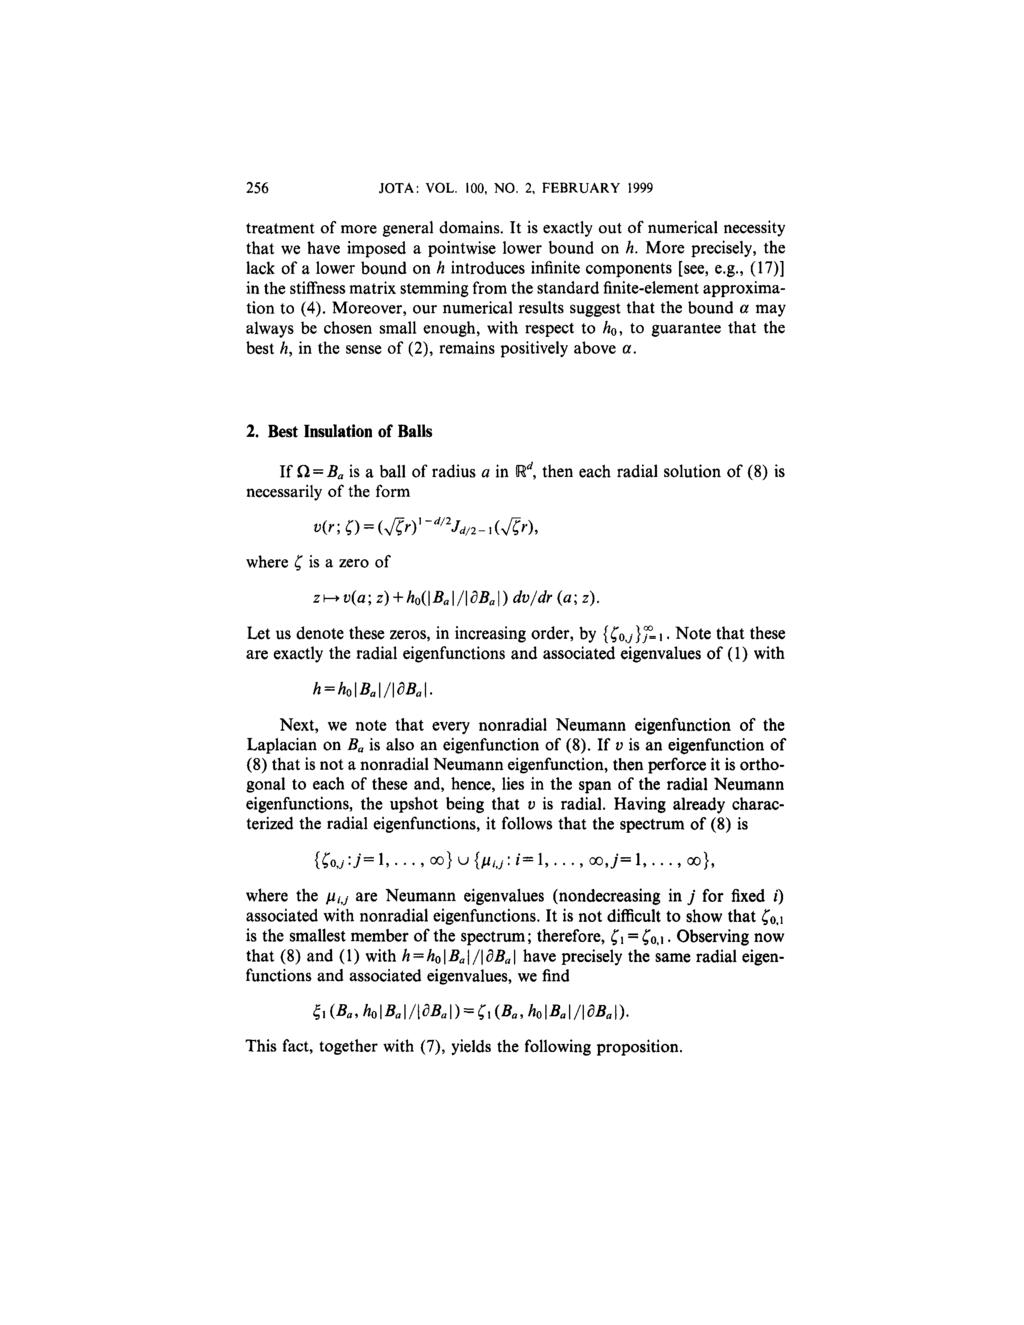 256 JOTA: VOL. 100, NO. 2, FEBRUARY 1999 treatment of more general domains. It is exactly out of numerical necessity that we have imposed a pointwise lower bound on h.